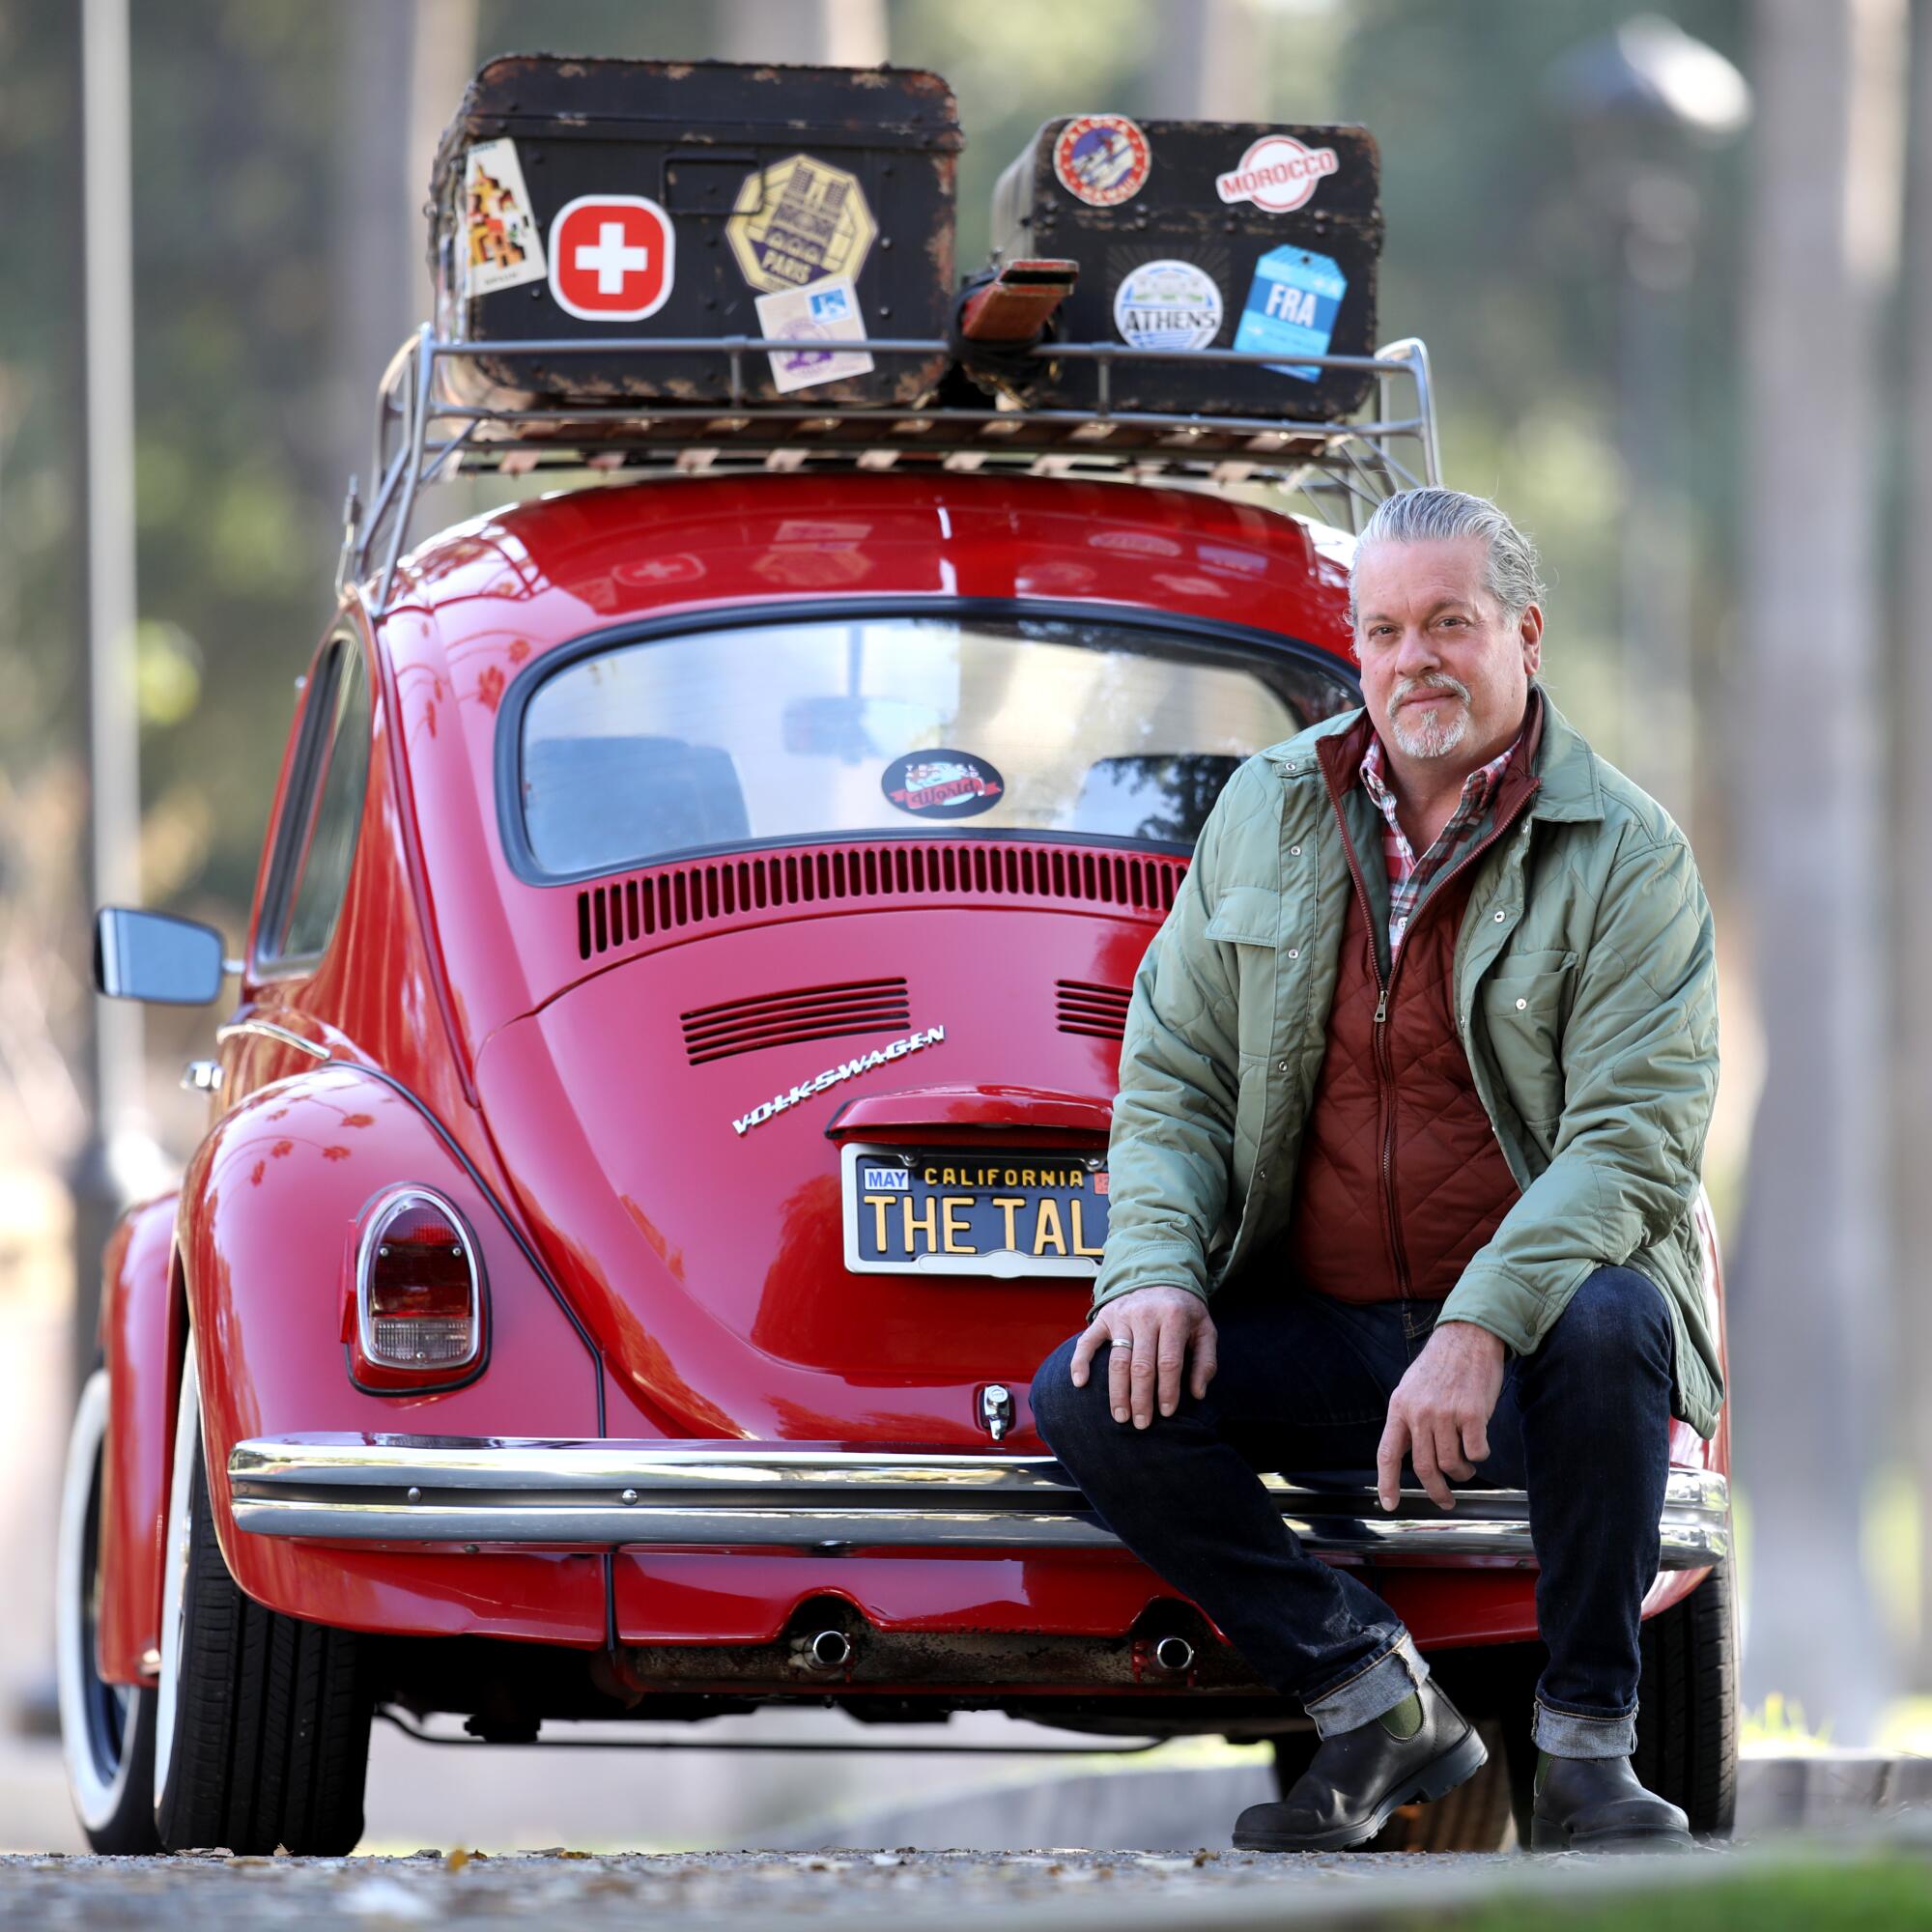 An older man sits on the back bumper of a red Volkswagen Beetle car with sticker-covered boxes on top.